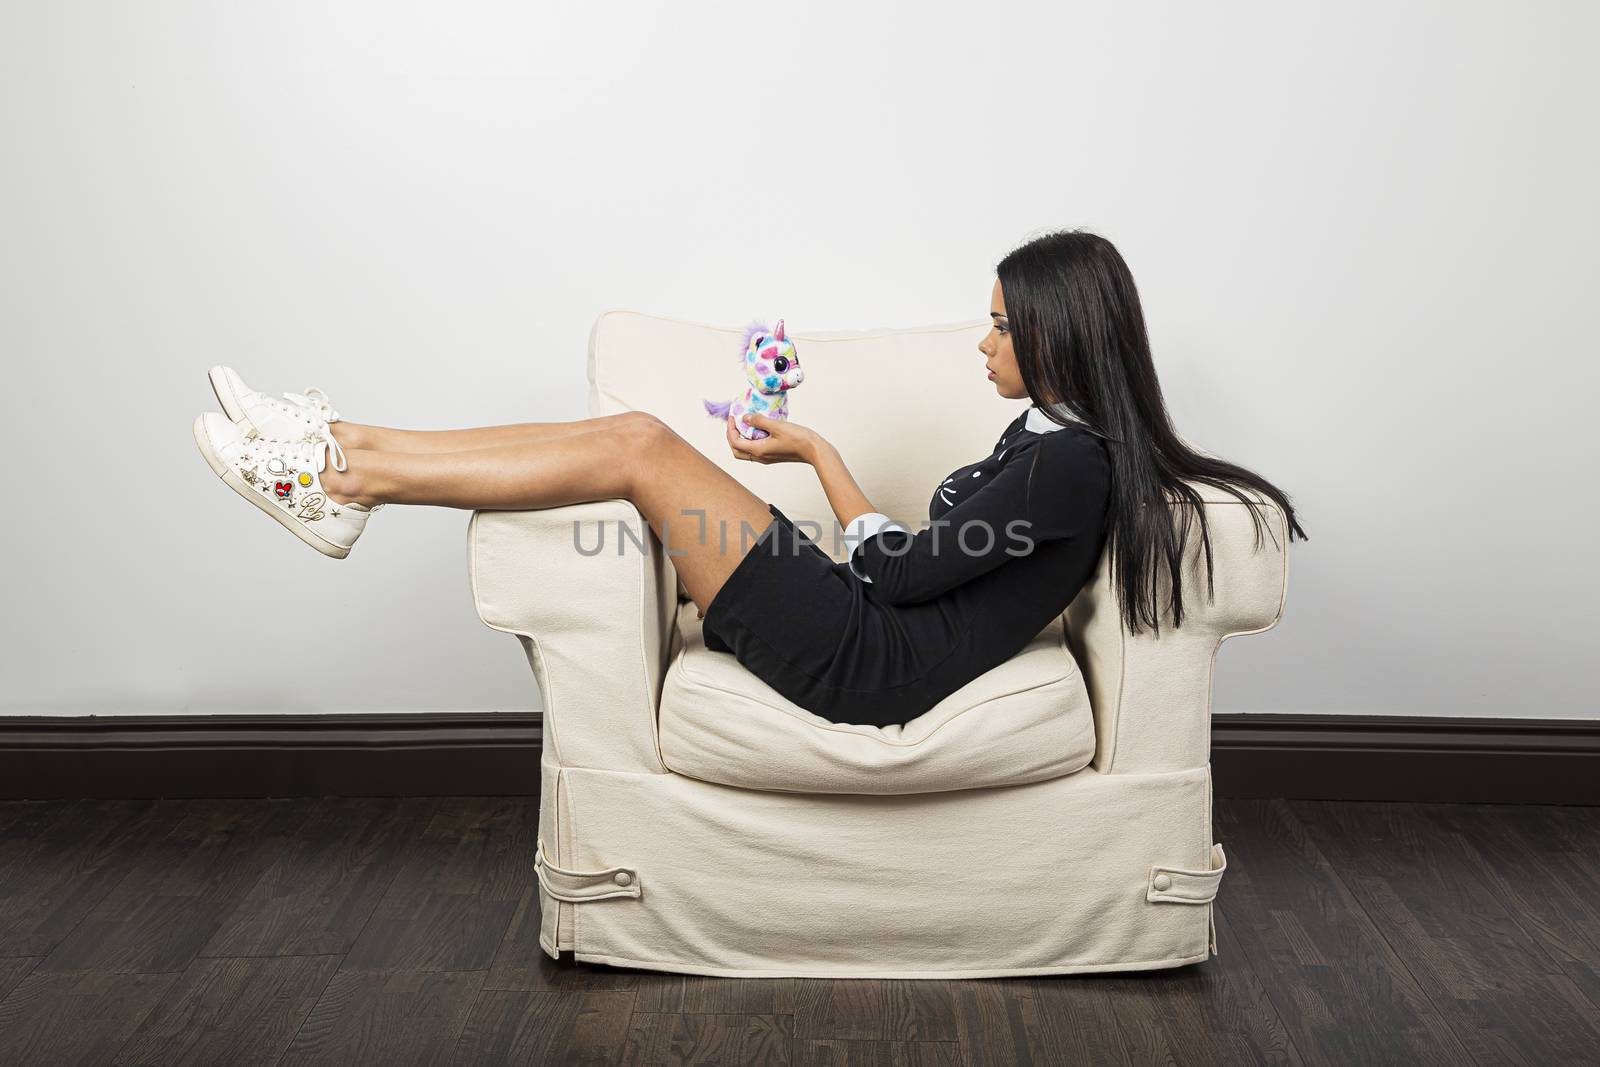 Young woman, with her feet up on a white couch, holding a small plush unicorn